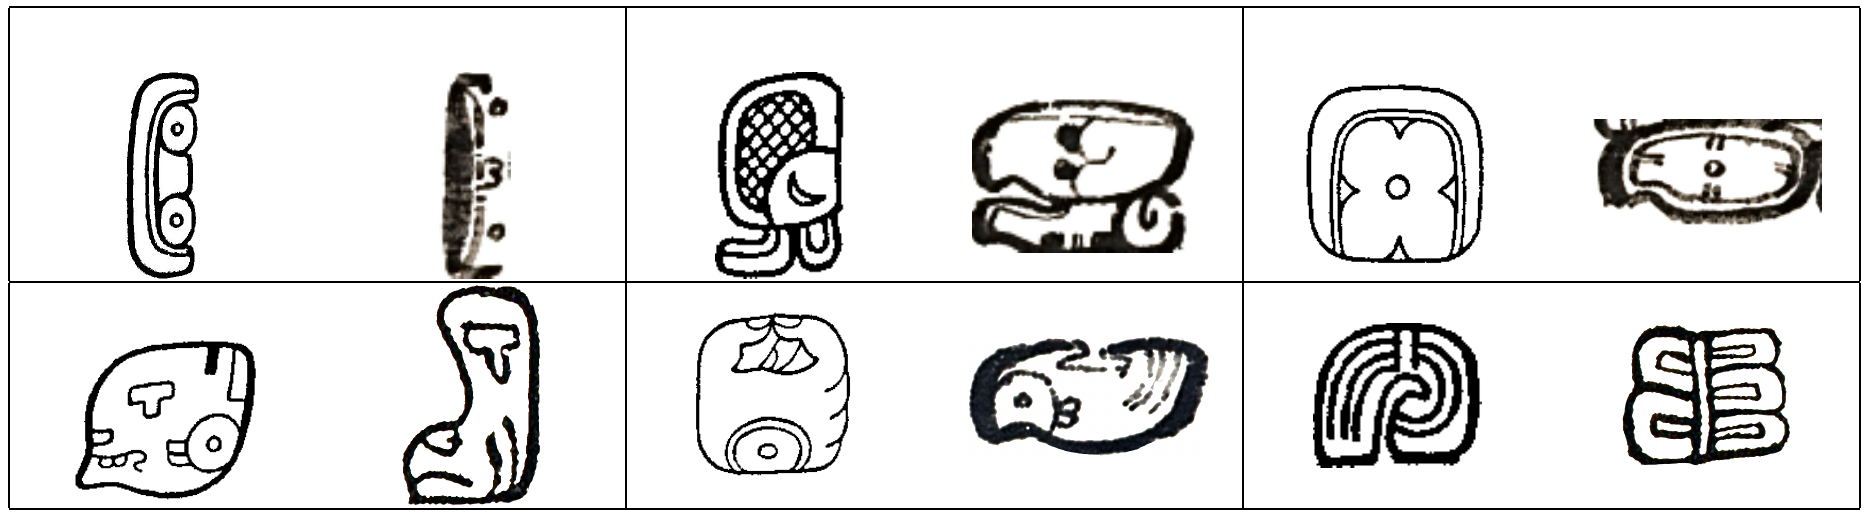 Figure 8. Six pairs of glyph signs (Hu, 2015). Each pair contains a query glyph from the 'Codex' dataset (right), and their corresponding groundtruth in the catalog (left).